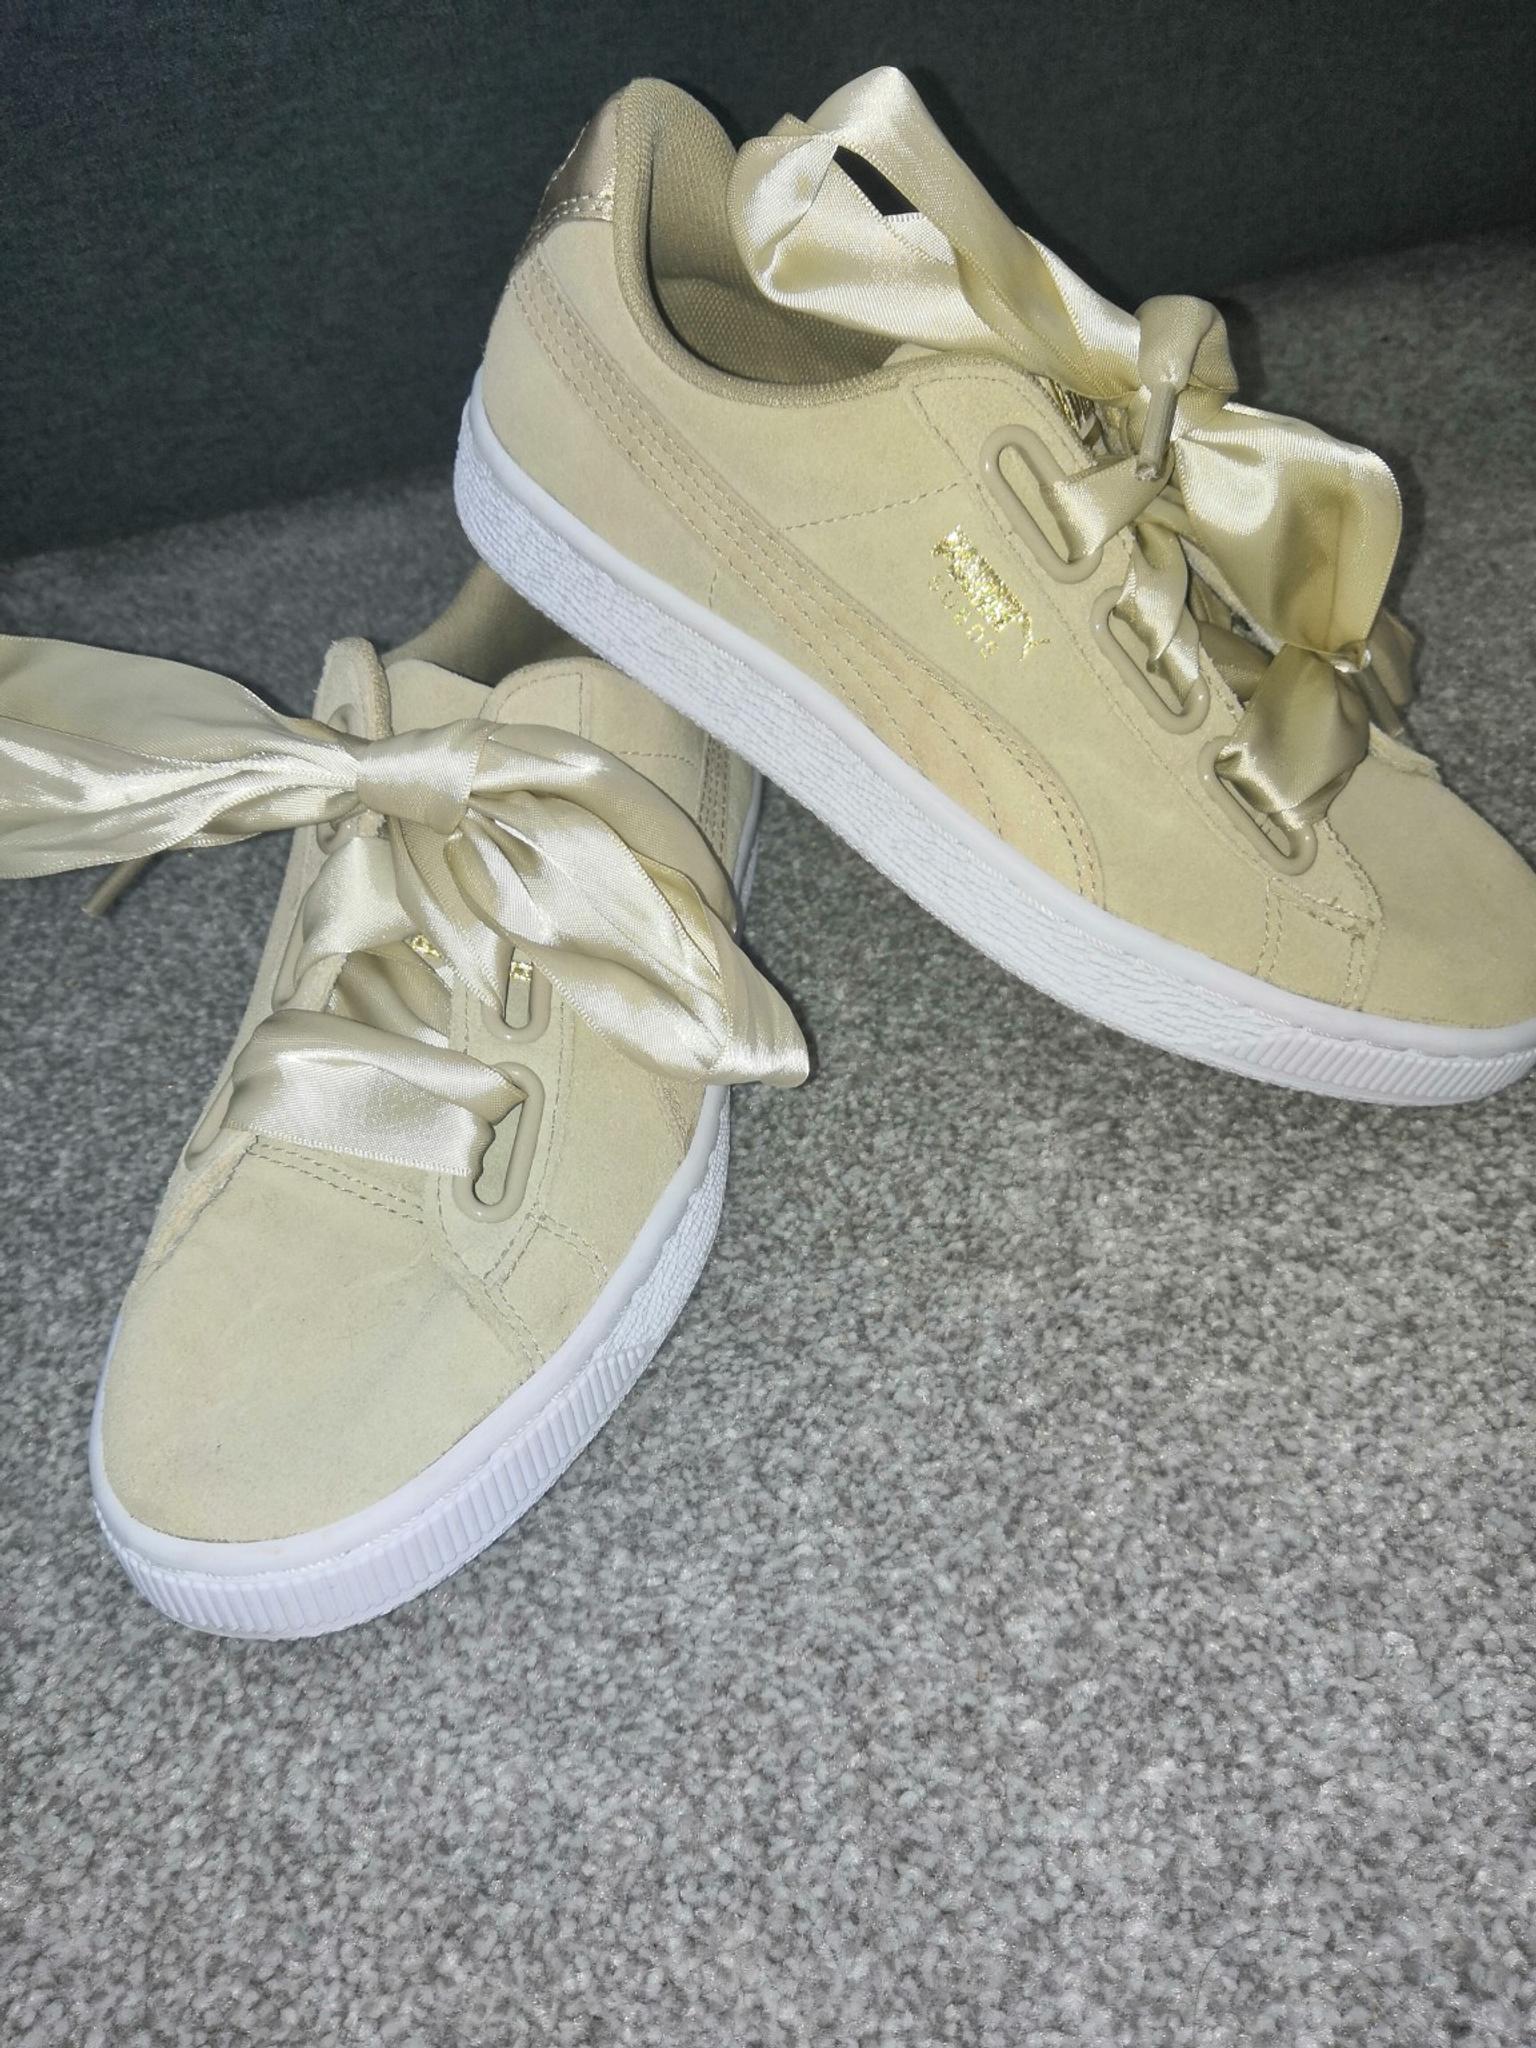 puma suede trainers size 4